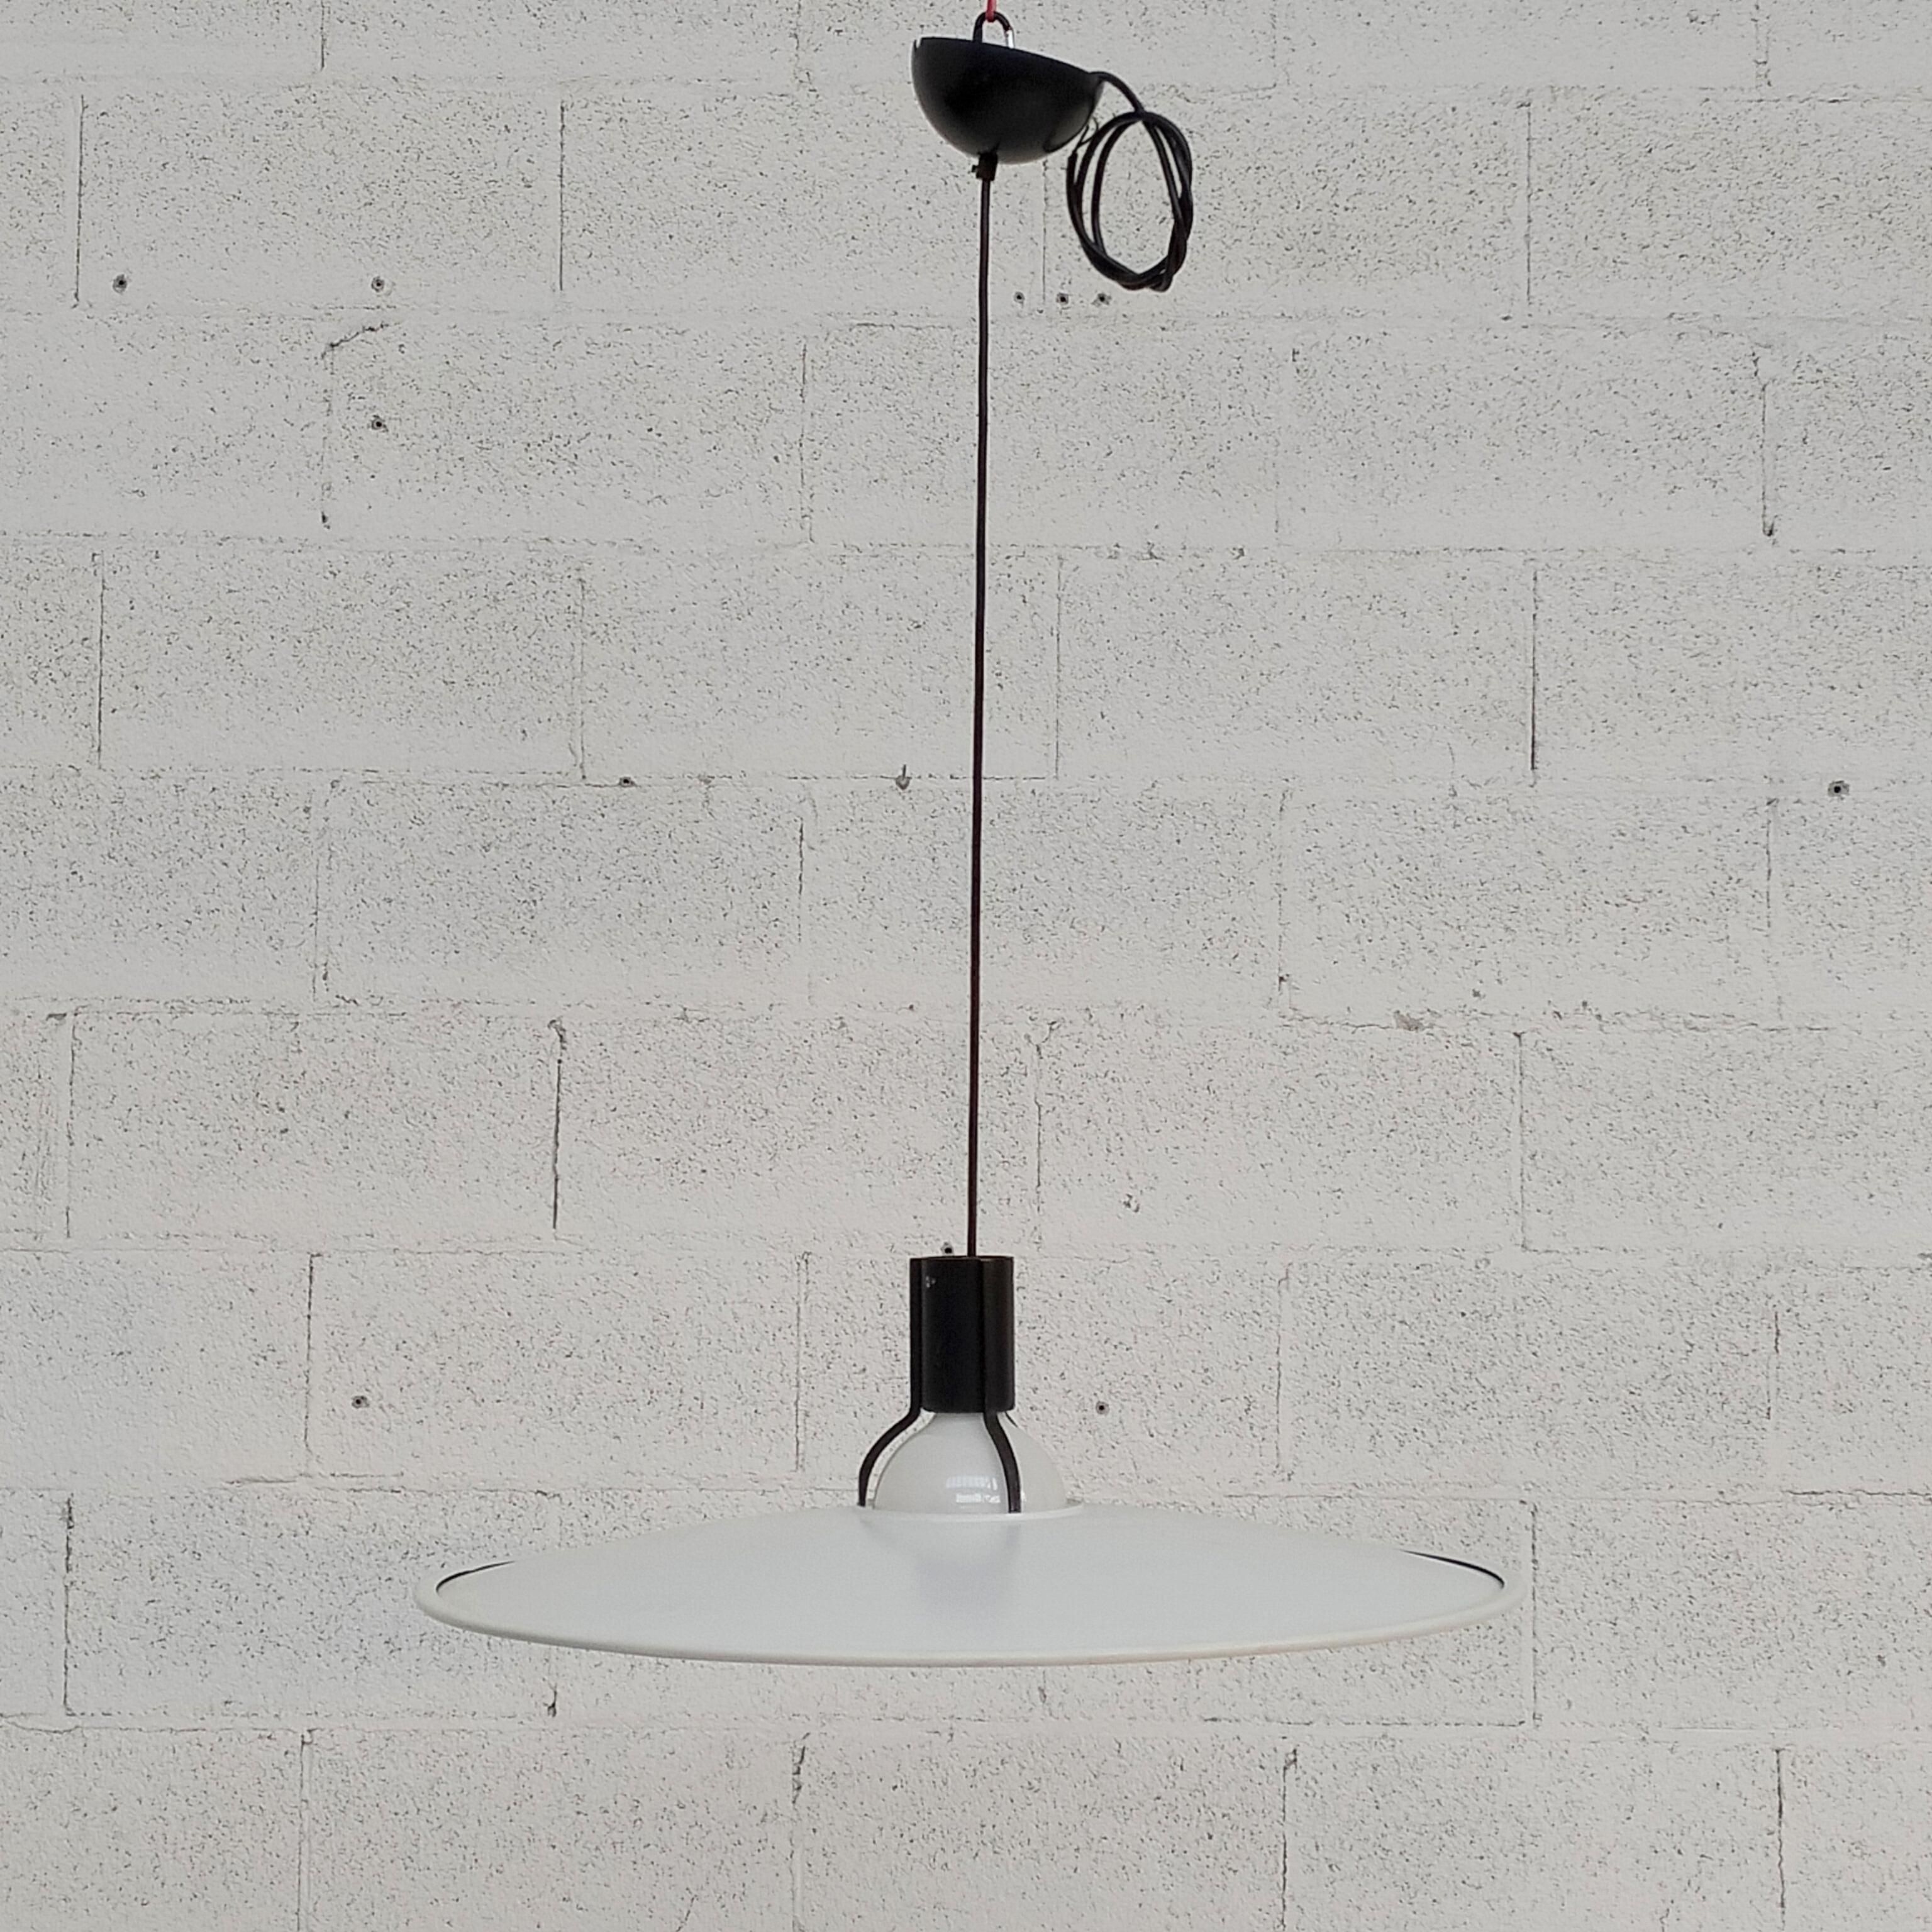 Metal chandelier pendant lamp 2133 model designed by Gino Sarfatti and manufactured by Arteluce Italy 1970s.
White metal lampshade with black metal lamp holder, where the lampshade stays on. Mark present in the upper part. E27 connection.
Good